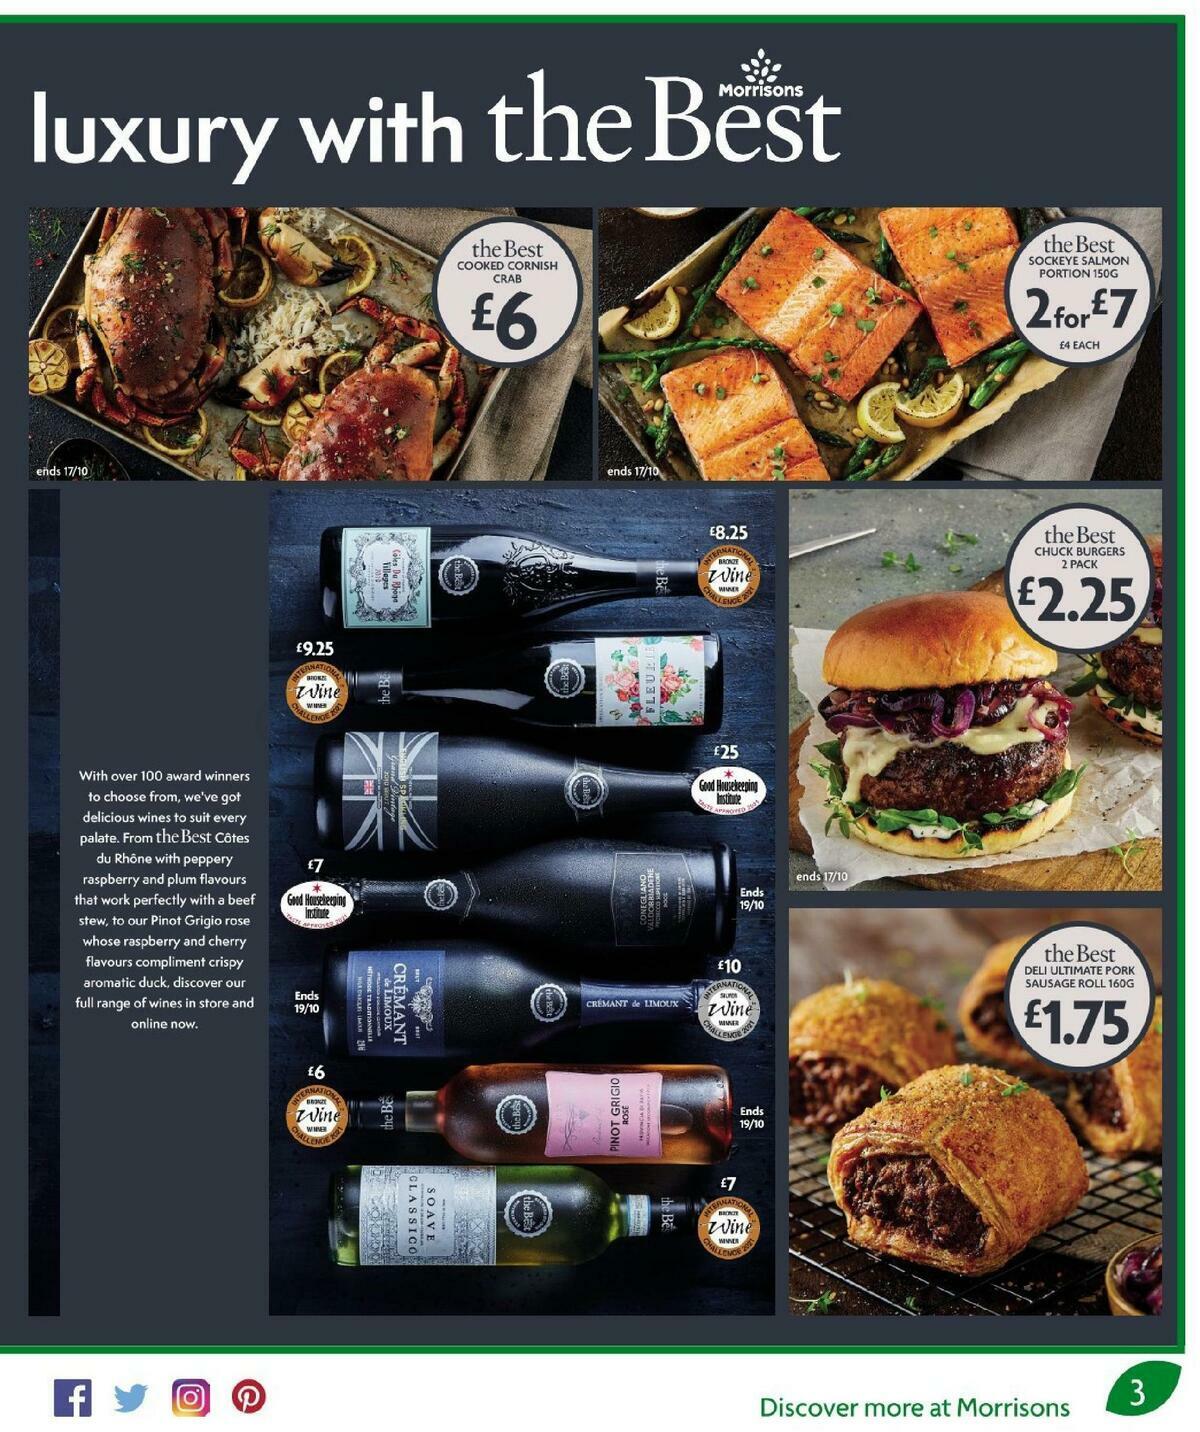 Morrisons Offers from 11 October